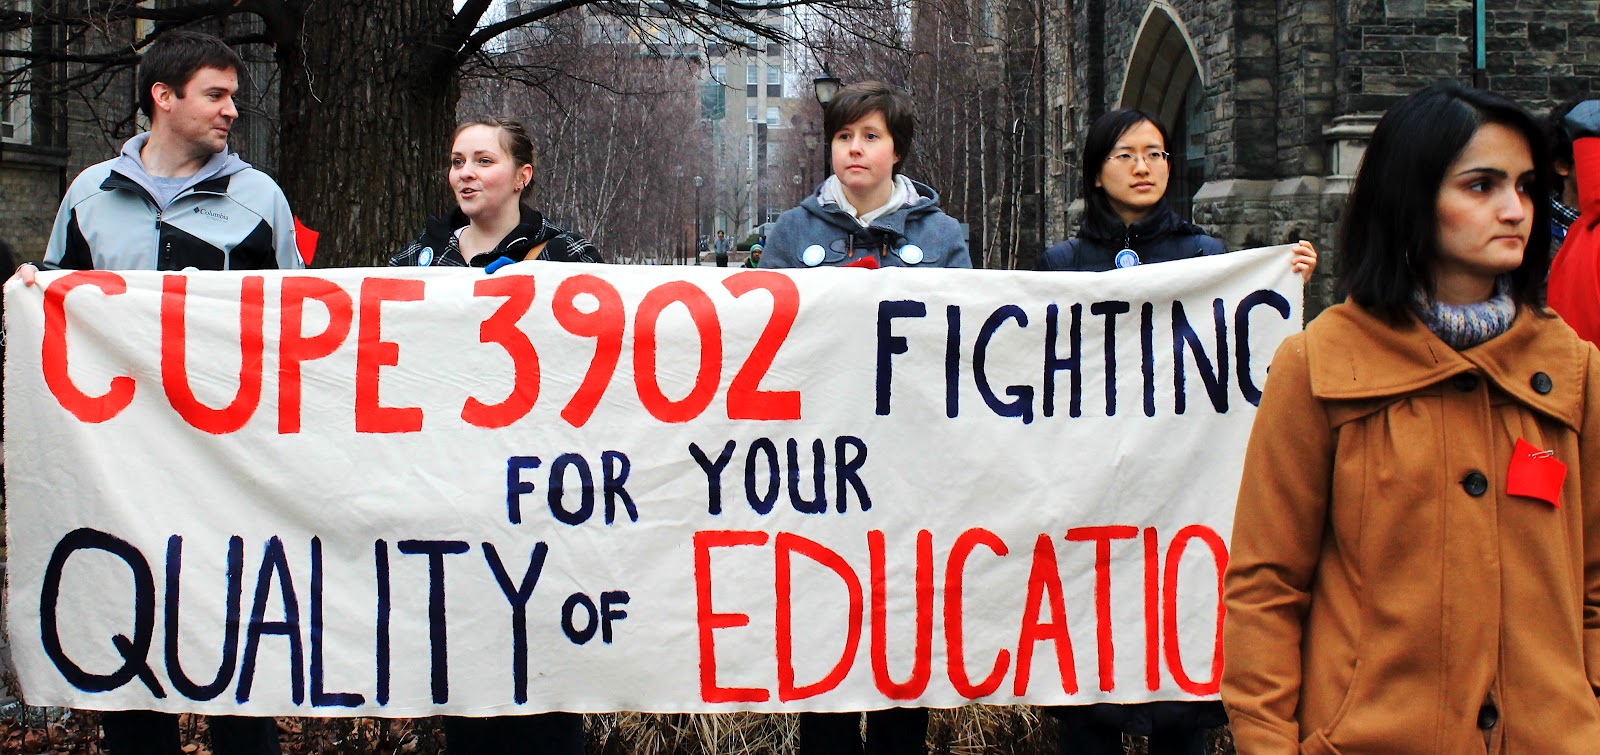 Tentative Collective Agreement Reached Between U of T and CUPE 3902, Unit 3